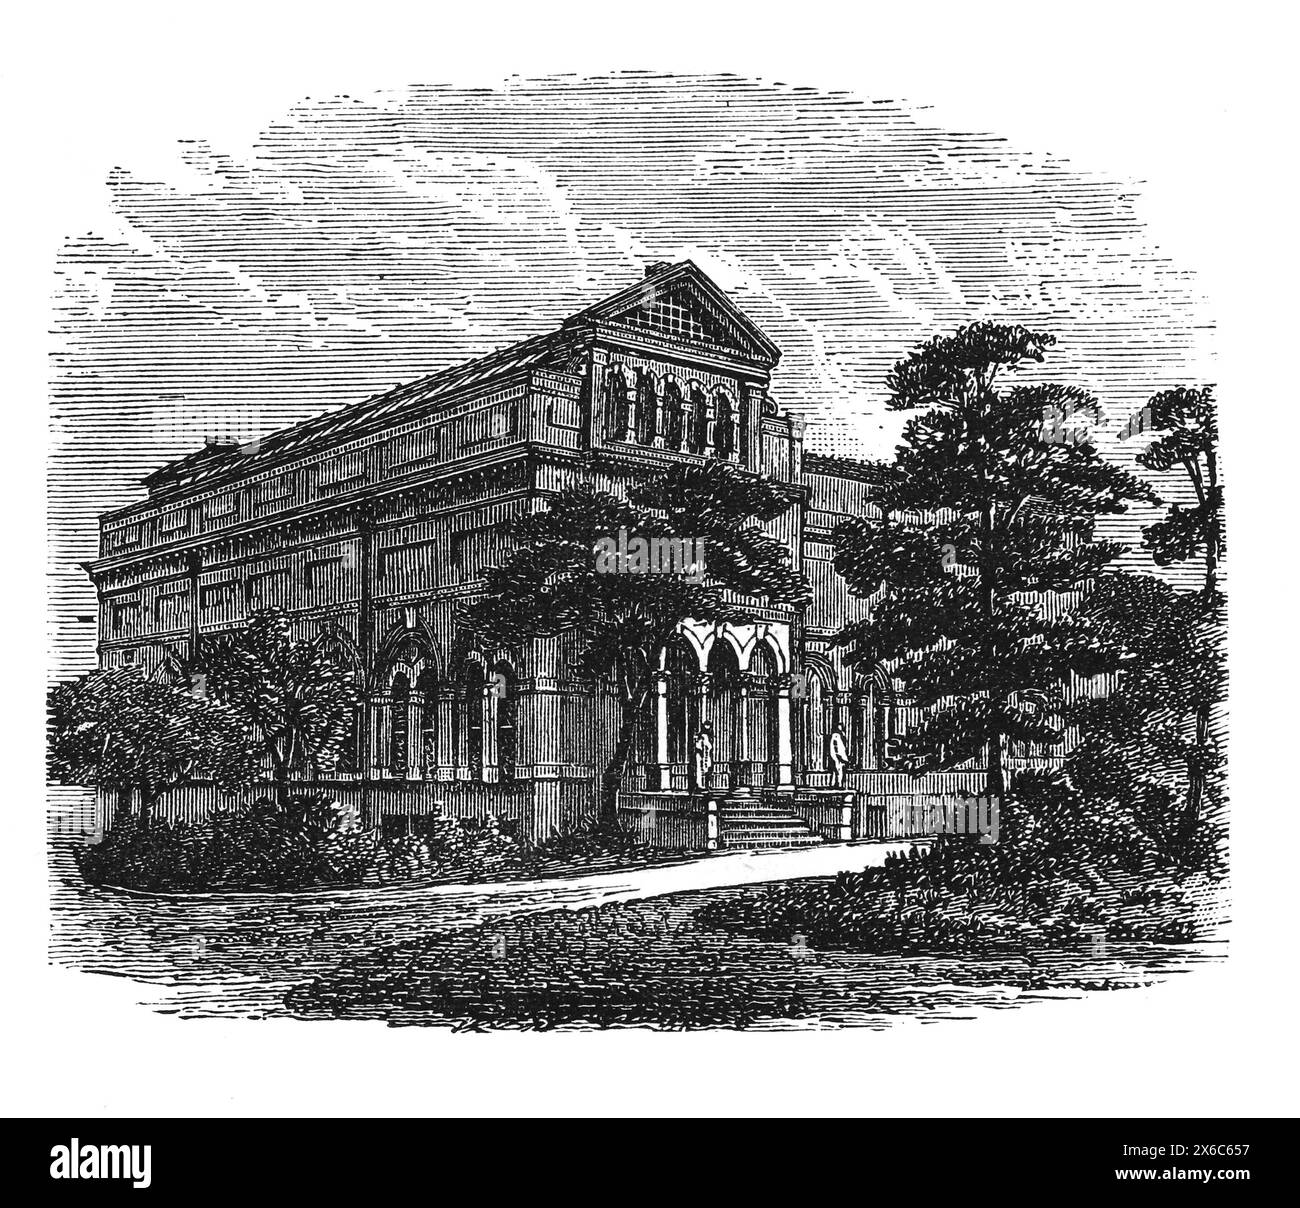 Royal Museum and Public Library in Peel Park, Salford. Late 19th century. Opened in 1850, The gallery and museum (now called Salford Museum and Art Gallery) are devoted to the history of Salford and Victorian art and architecture. Black and White Illustration from Our Own Country Vol III published by Cassell, Petter, Galpin & Co. in the late 19th century. Stock Photo